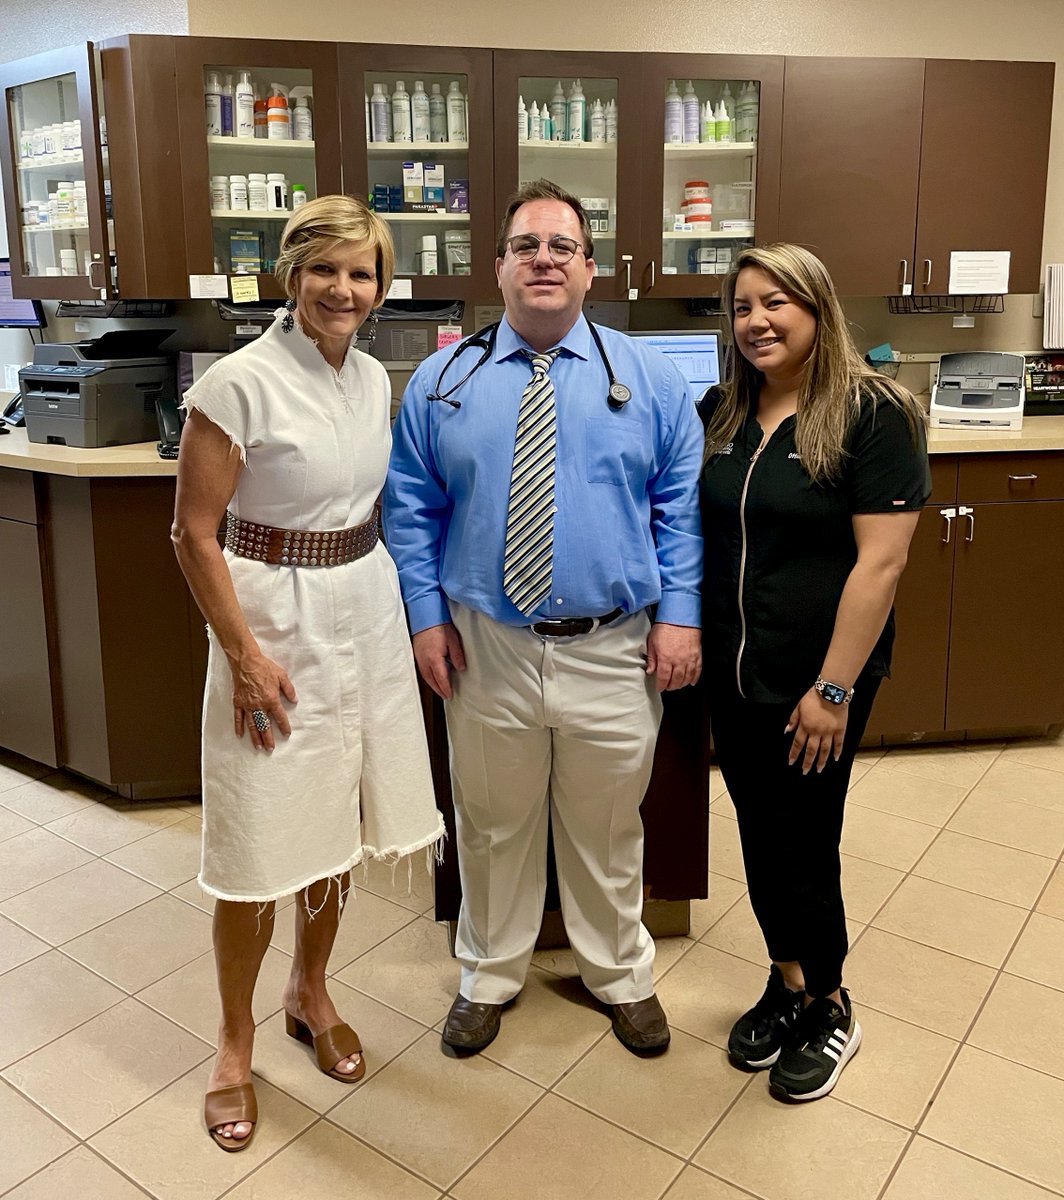 AVMA Ambassador Dr. Travis McDermott hosted @RepSusieLee last week at the Durango Animal Hospital in Nevada. During the visit, Congresswoman Lee and Dr. McDermott talked about how Congress can help protect, promote, and advance the veterinary profession!